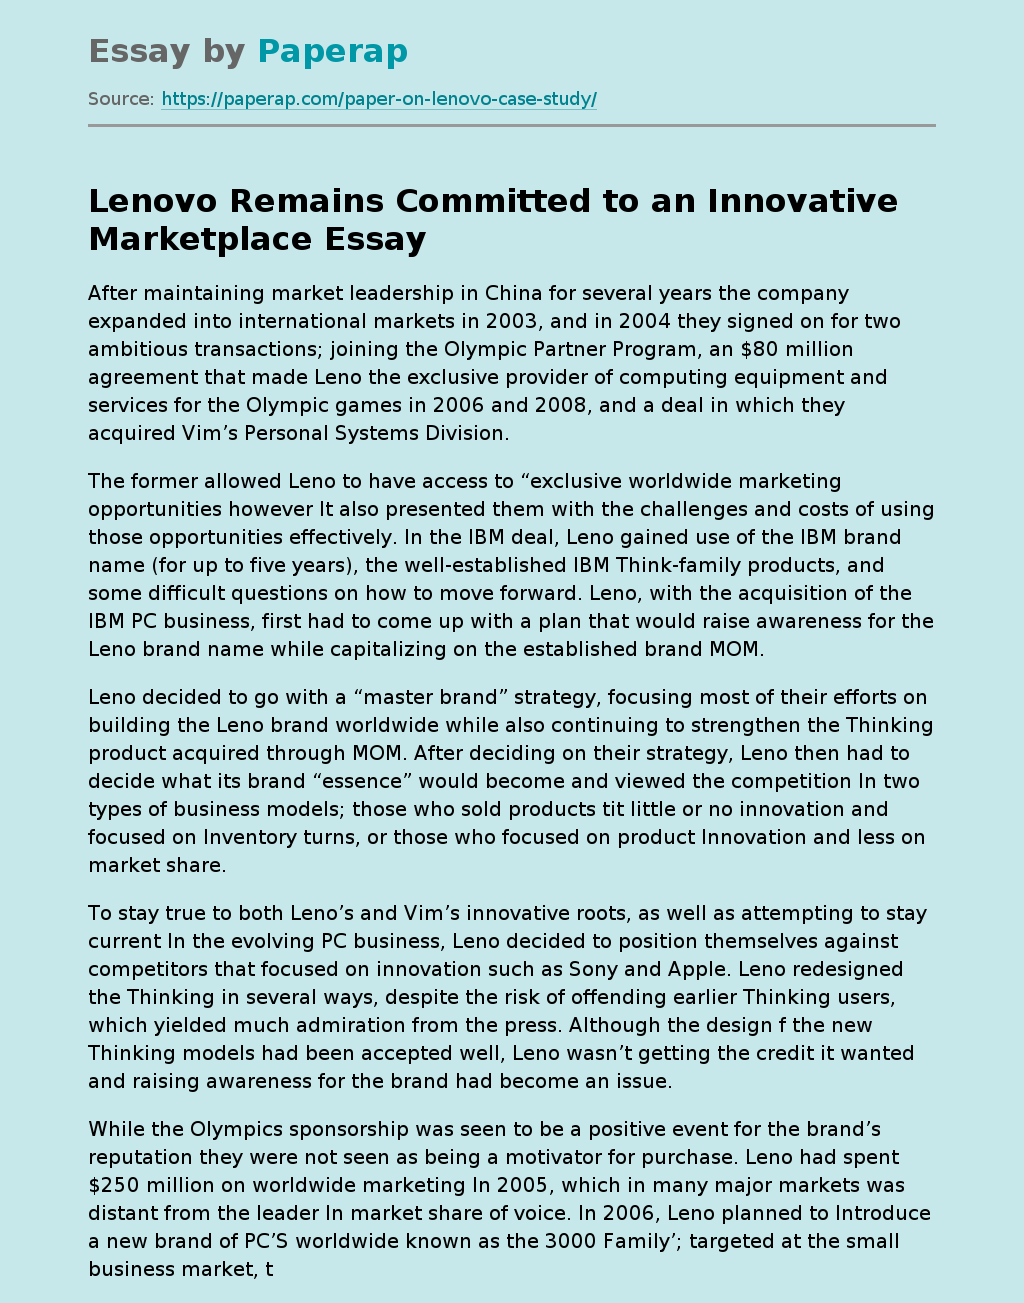 Lenovo Remains Committed to an Innovative Marketplace